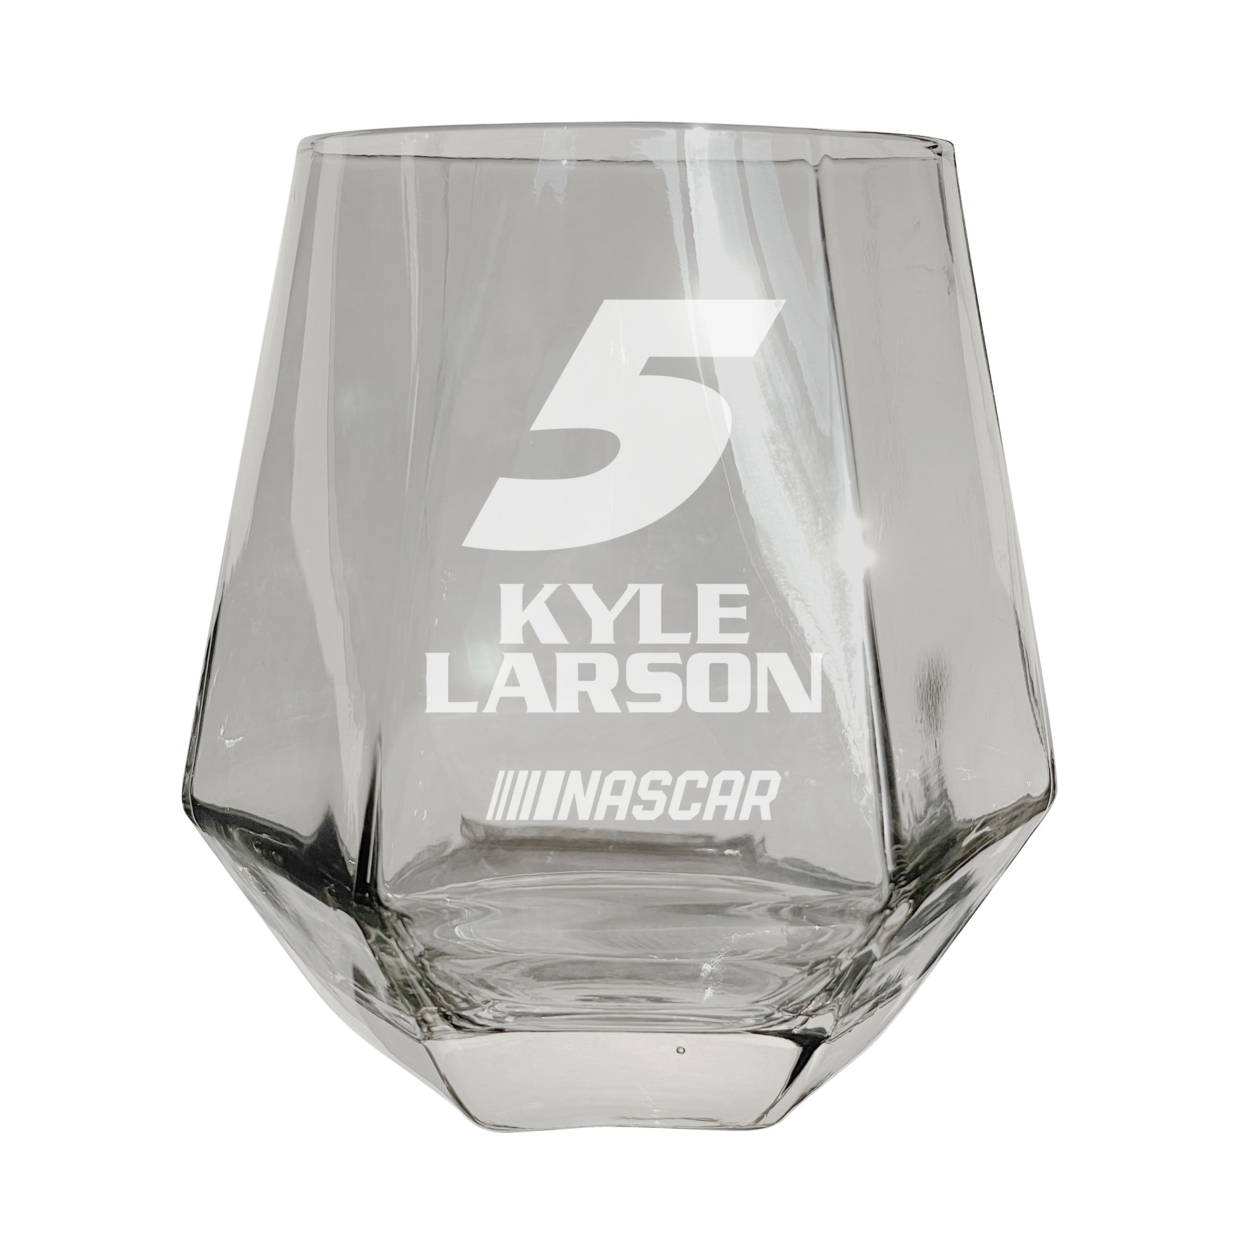 #5 Kyle Larson Officially Licensed 10 Oz Engraved Diamond Wine Glass - Clear, 2-Pack